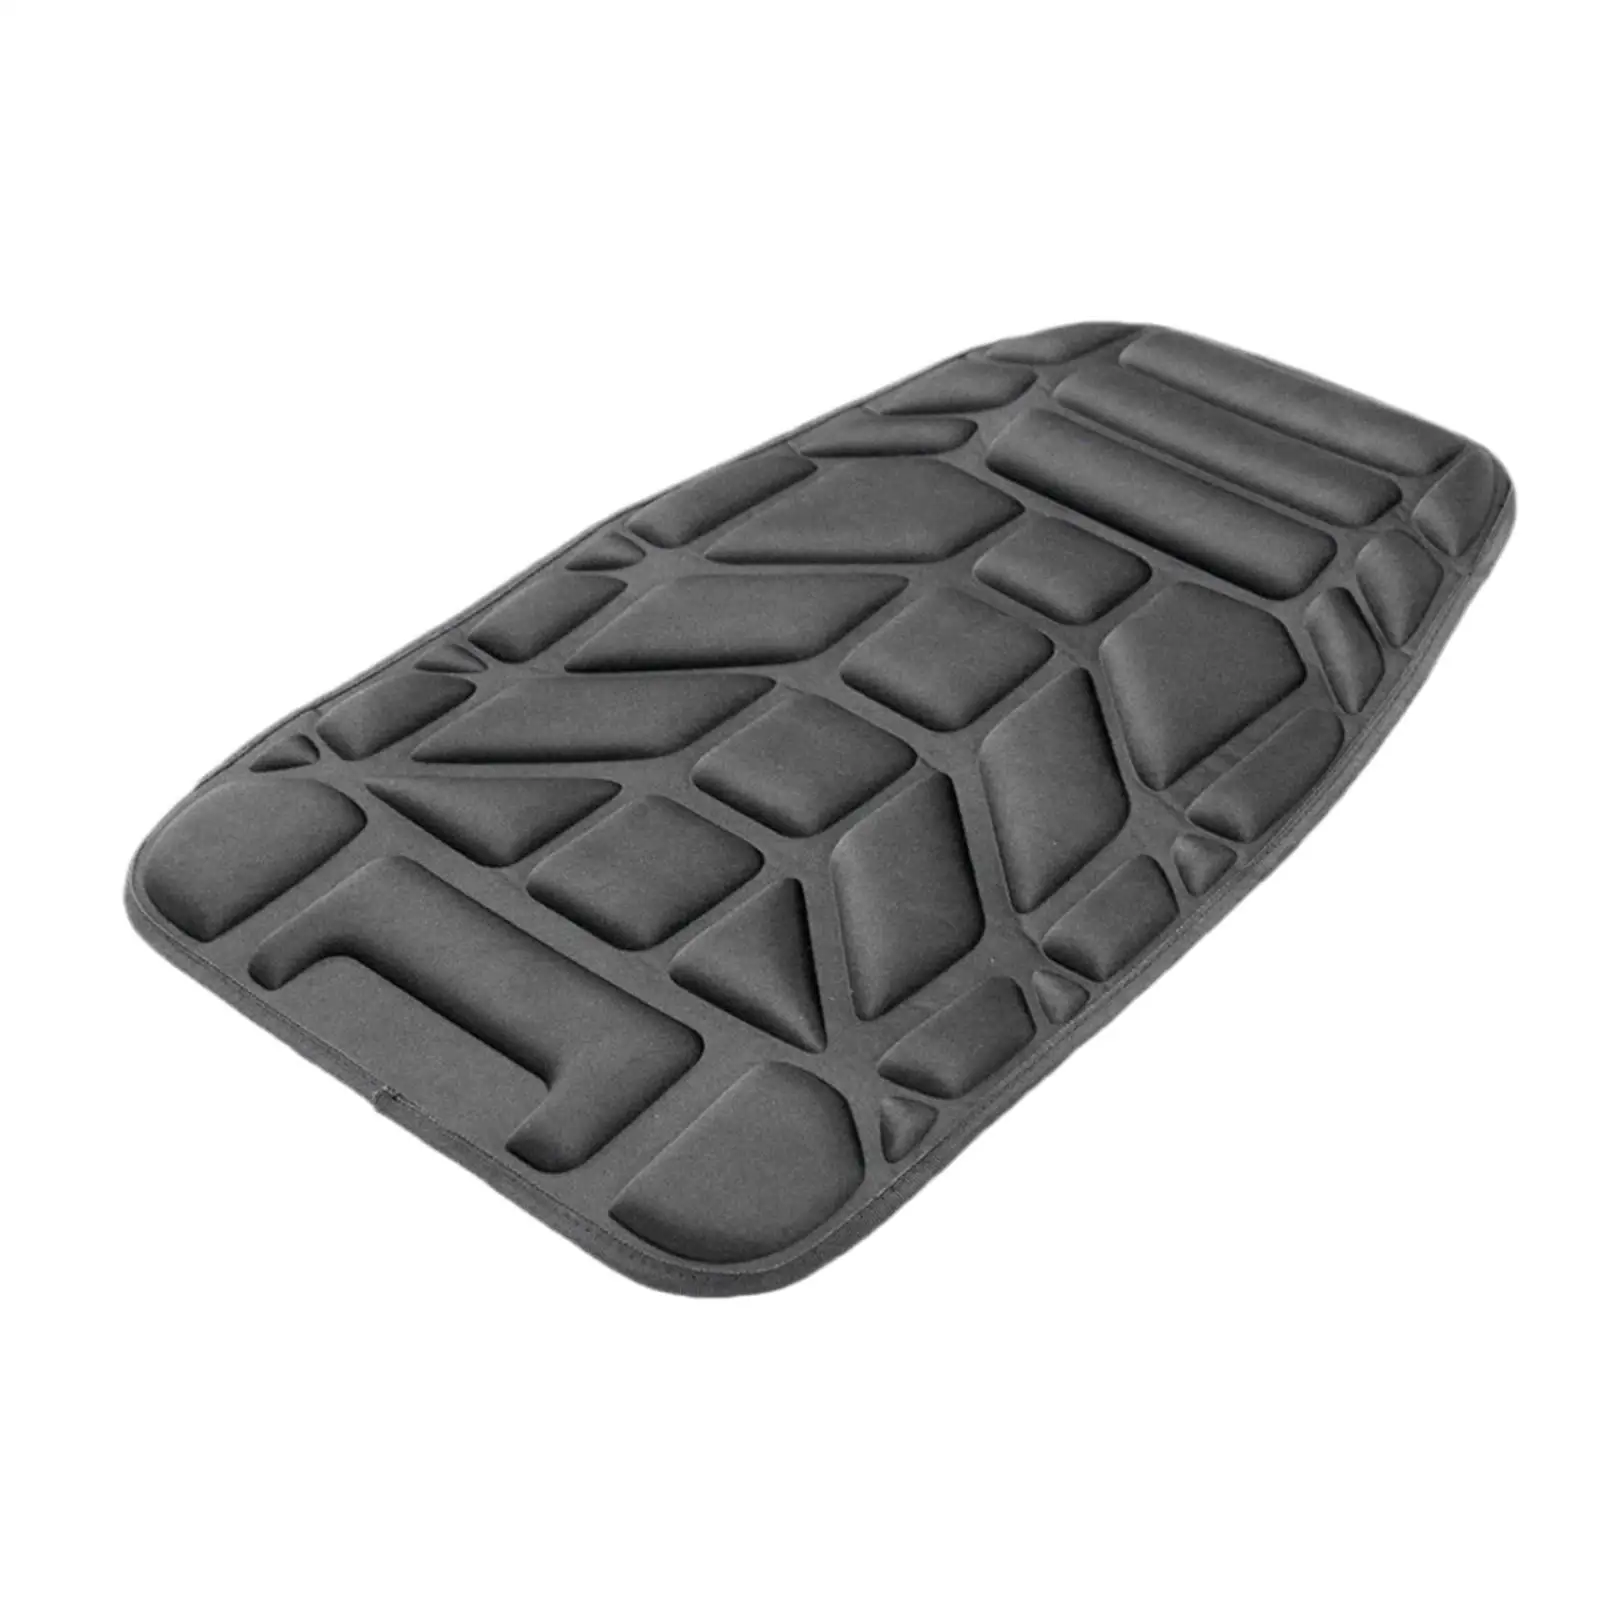 Beach Motorcycle Seat Cover Cushion Sunscreen Summer for ATV 